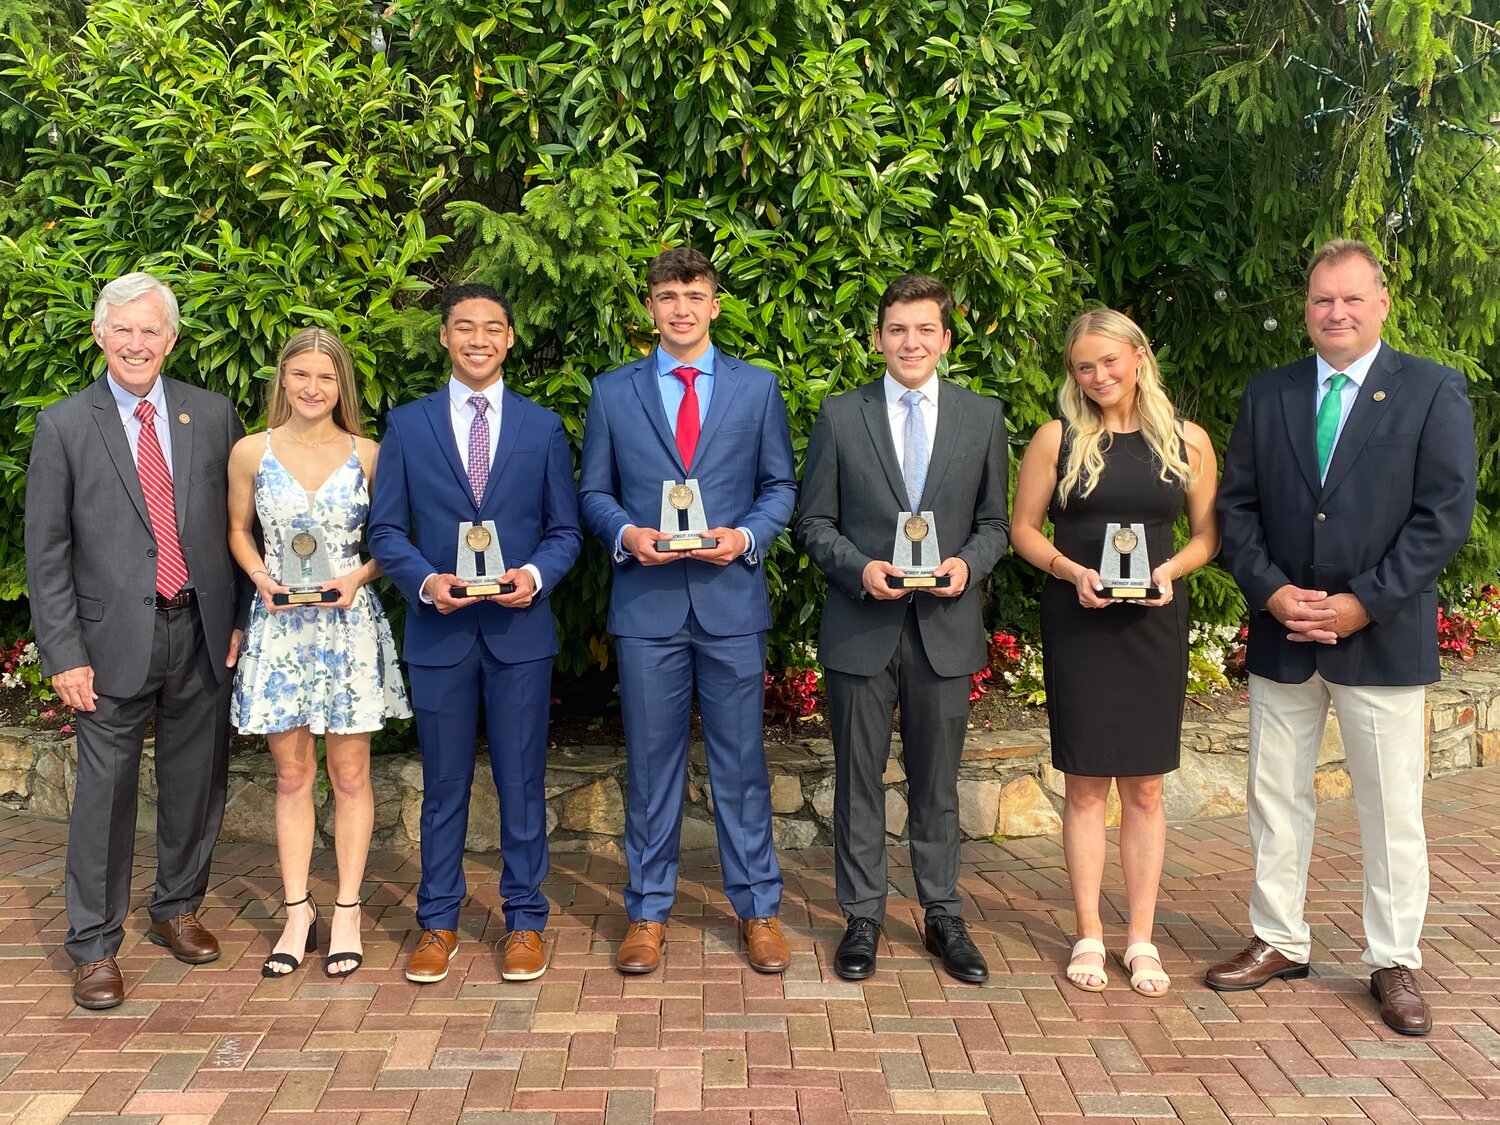 Seaford 9/11 Memorial Committee Chairman Tom Condon, far left, 2023 Patriot Award winners Nicole Nietsch, Ryan Baldwin, William Kind, William Cascio and Jamie Young, and committee President Ken Haskell, the brother of Timothy and Thomas Haskell.